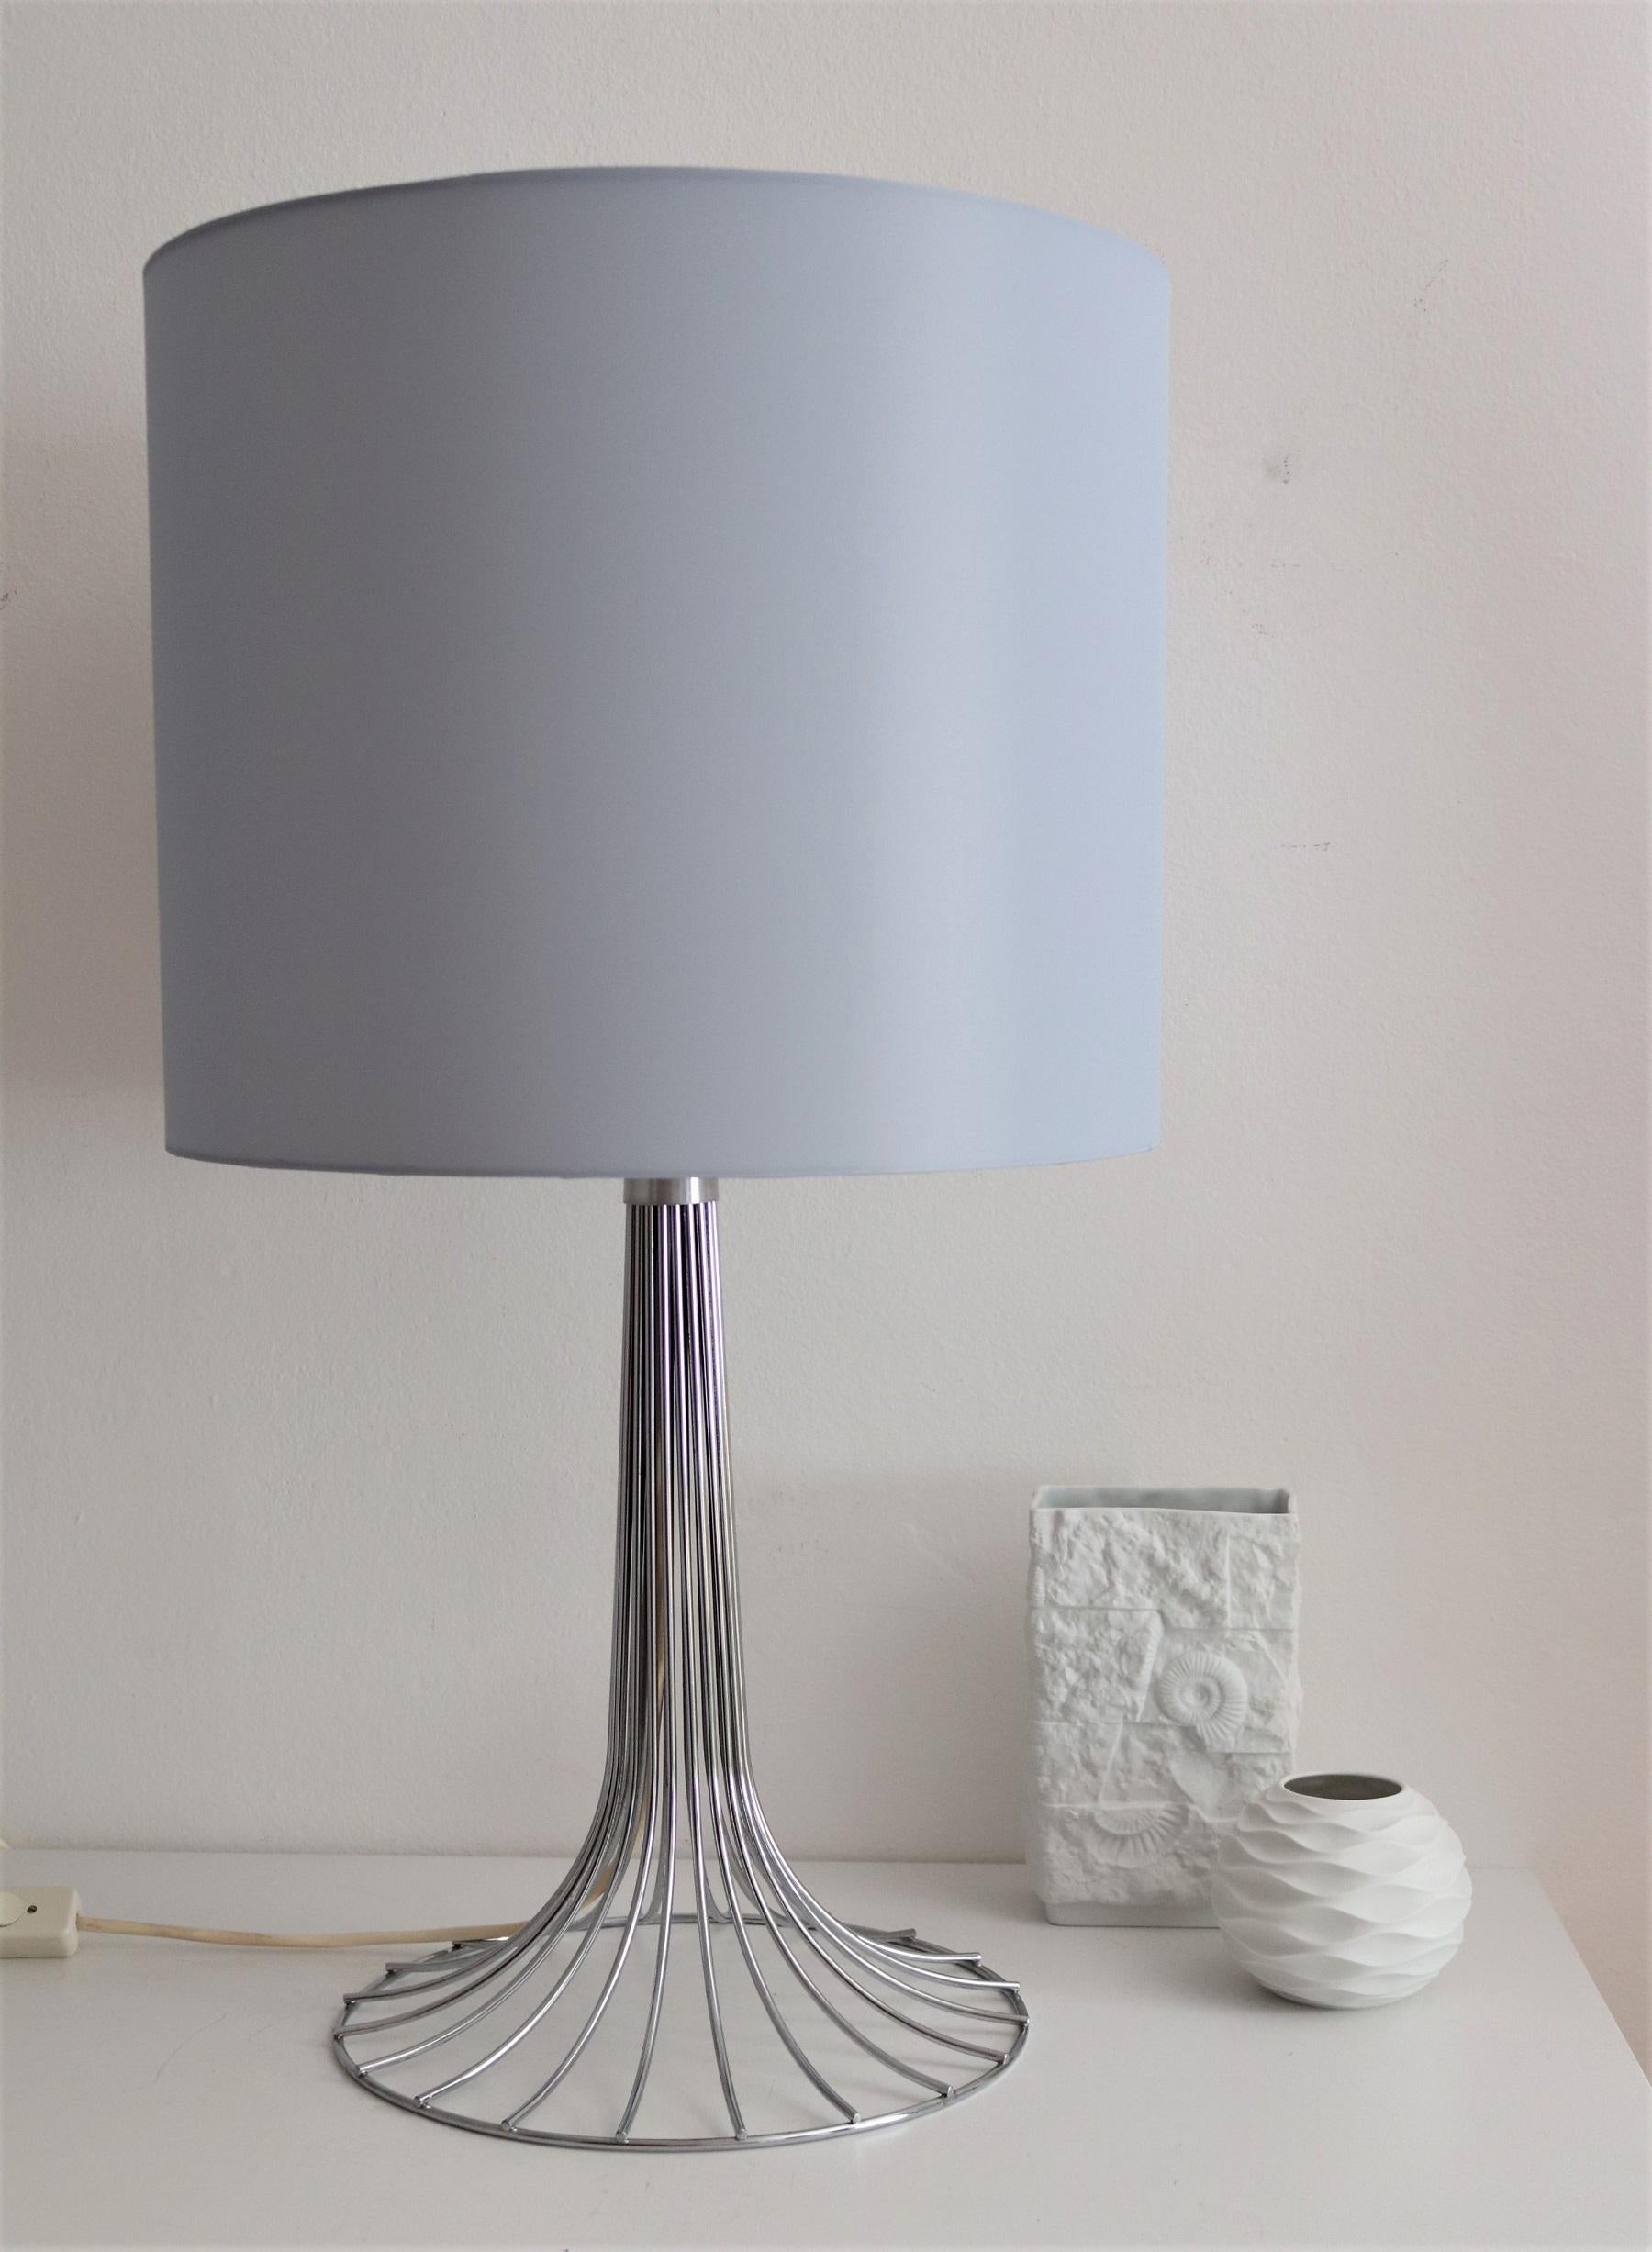 Gorgeous and tall chrome table lamp in original version made by Kinkeldey, Germany, in the 1970s.
The lamp's base is chrome plated and in very good to excellent condition.
The up-going bar is equipped with 4 original bulb holders for Edison bulbs,